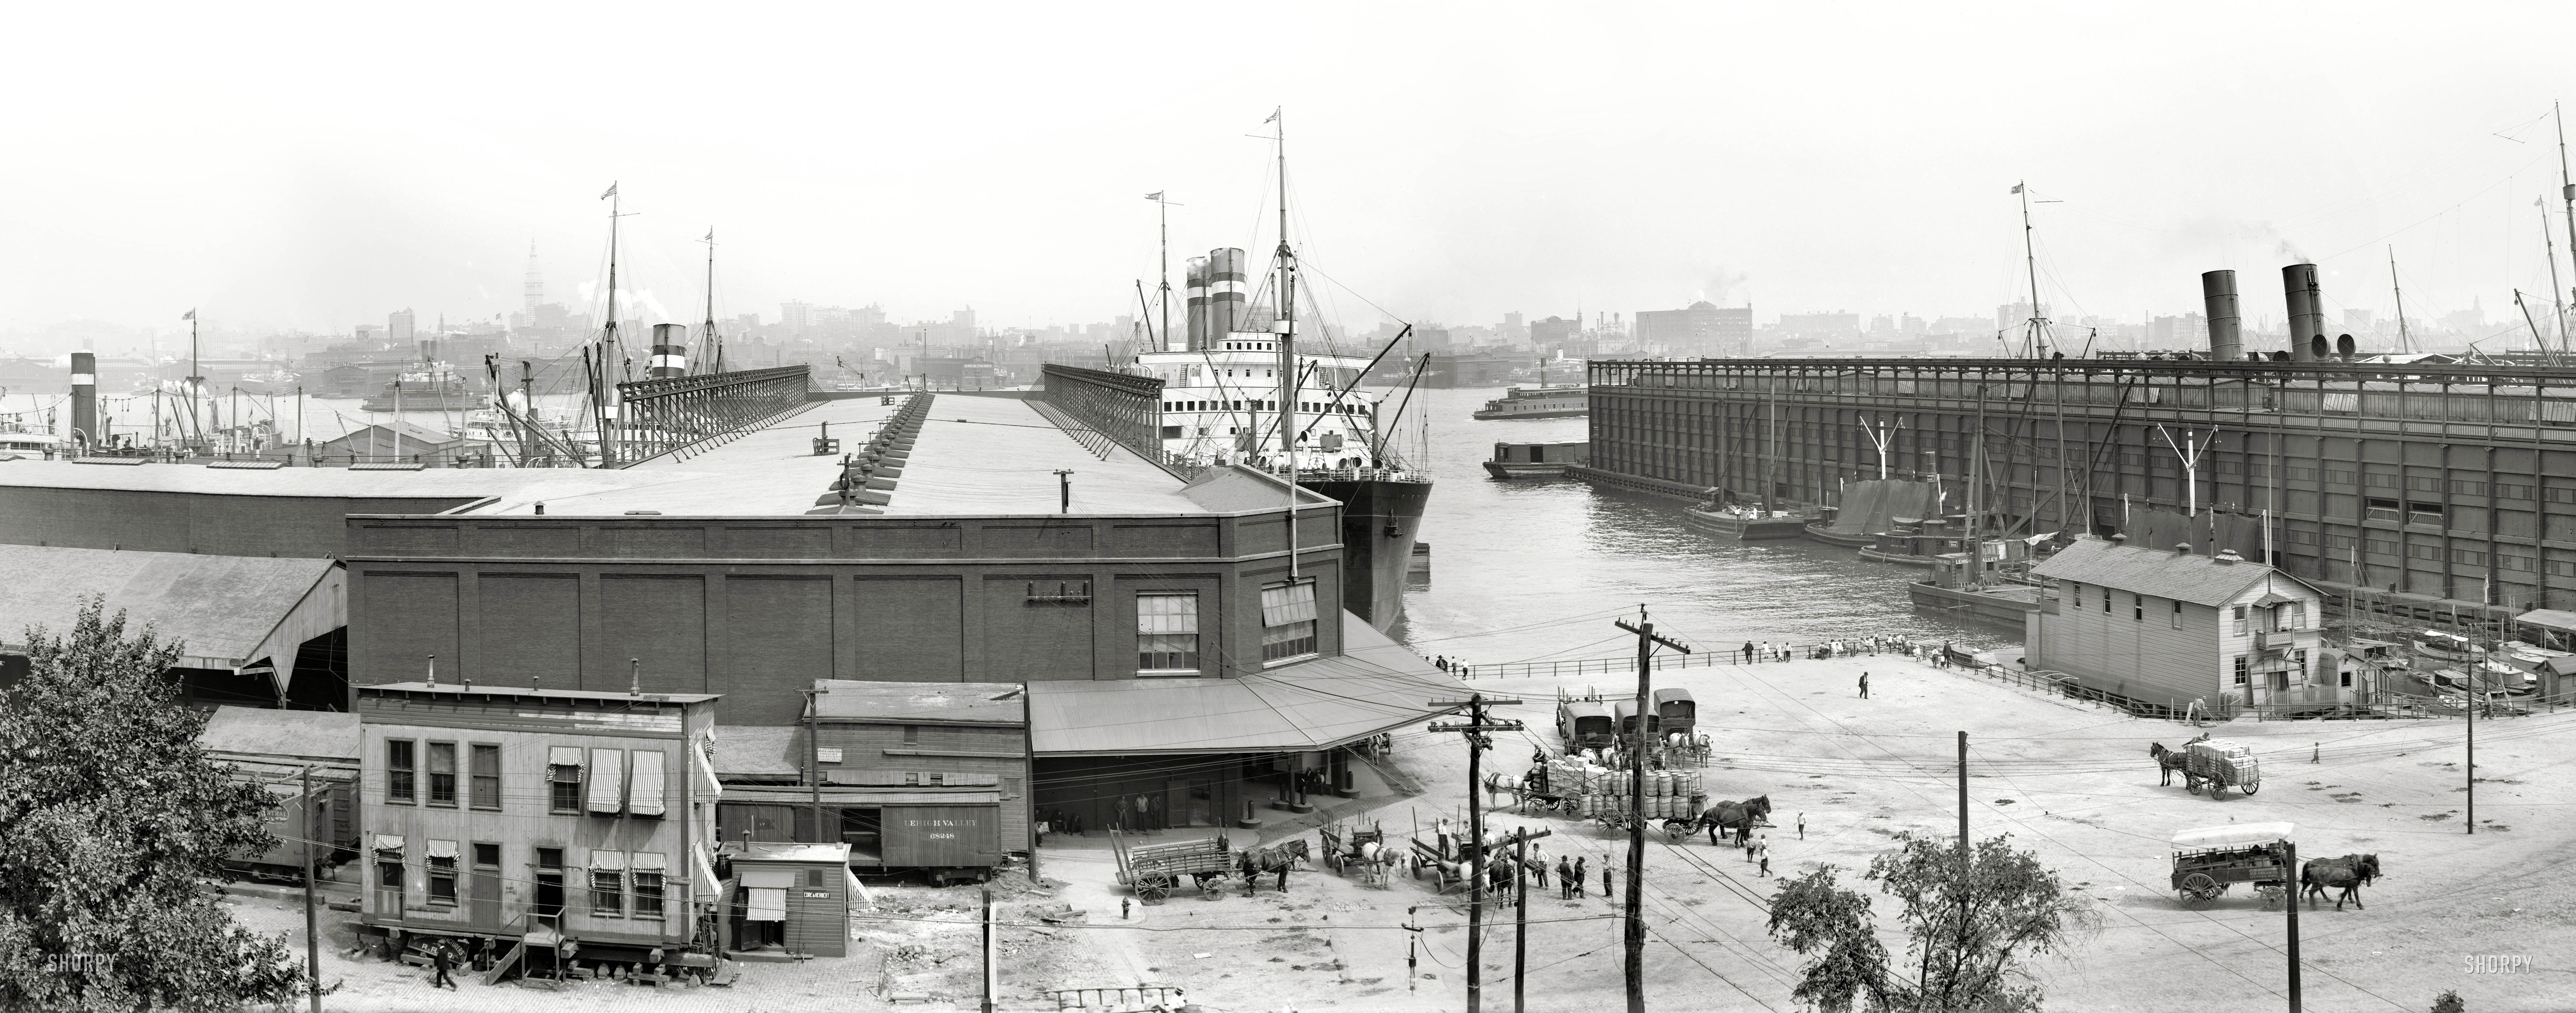 Hoboken, New Jersey, circa 1910. "Holland America docks and Manhattan skyline." Another three-plate panorama showing the S.S. Rotterdam, and a different perspective on the Curious Tipsy Shed. View full size.